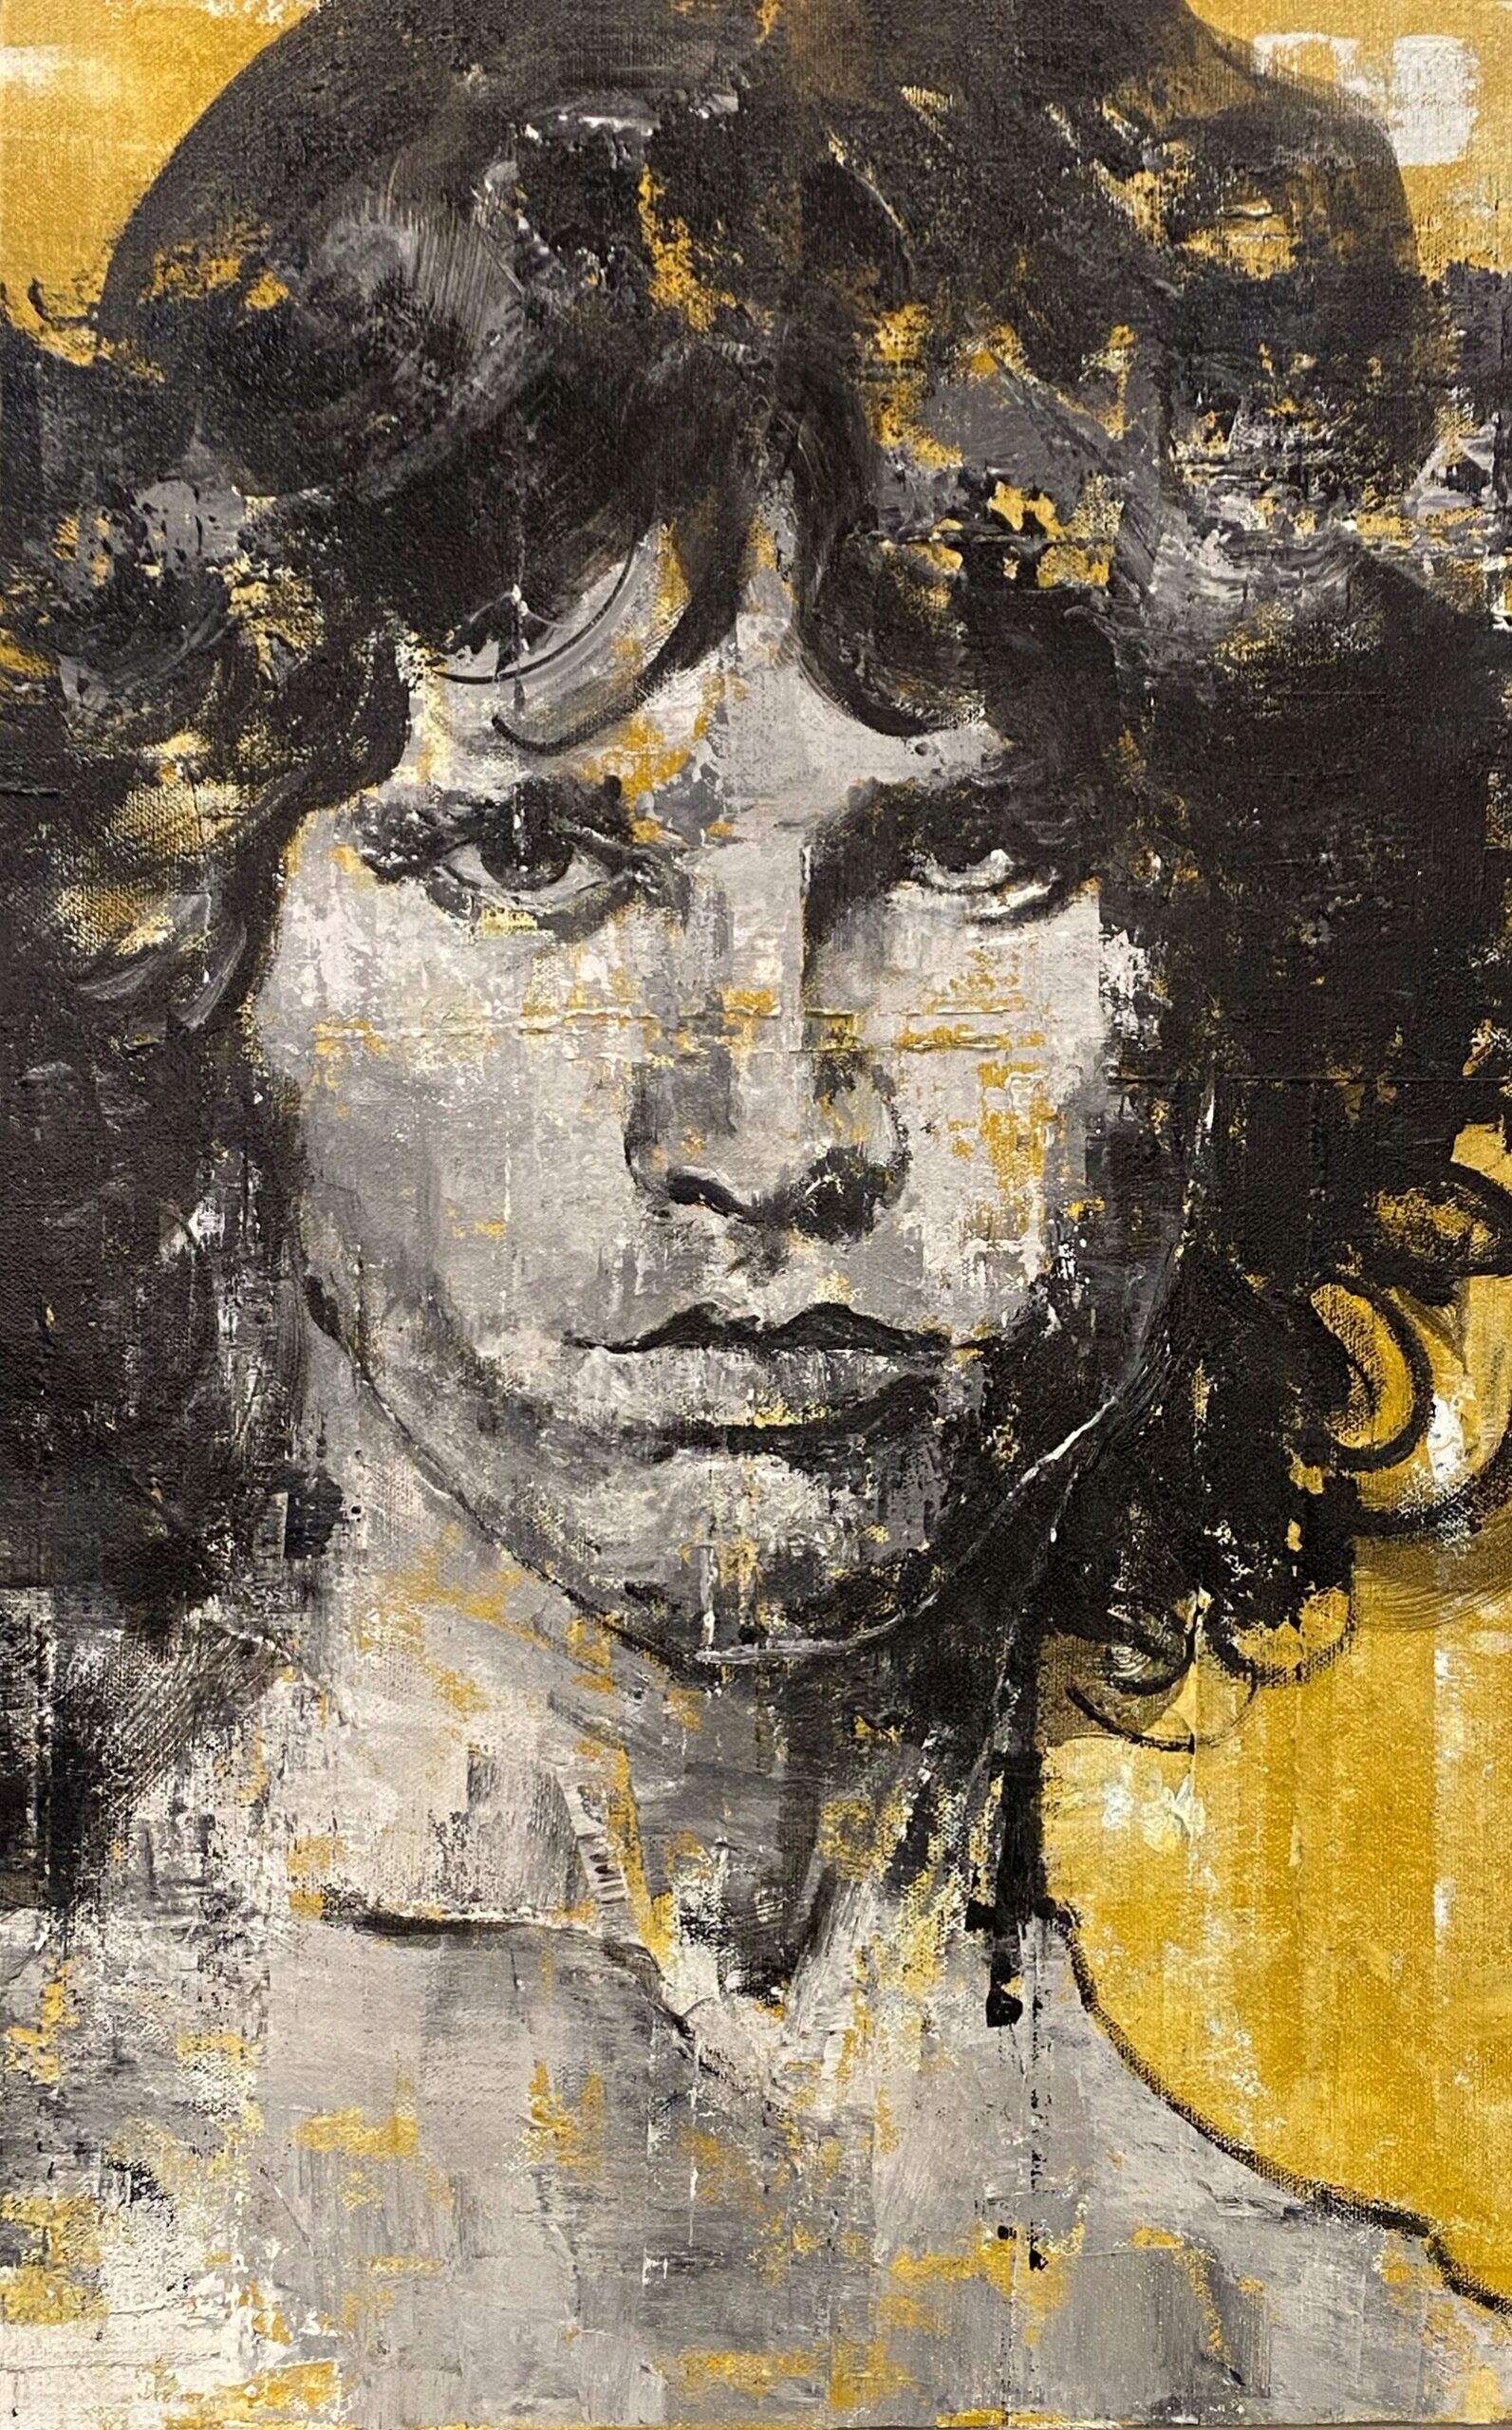 Acrylic painting of Jim Morrison by Abhishek Deheriya. The painting portrays a captivating and enigmatic portrait of the iconic rock musician, Jim Morrison. The artist has captured his likeness with meticulous brushwork and a dynamic color scheme, evoking the charisma and intensity of Jim Morrison's stage presence